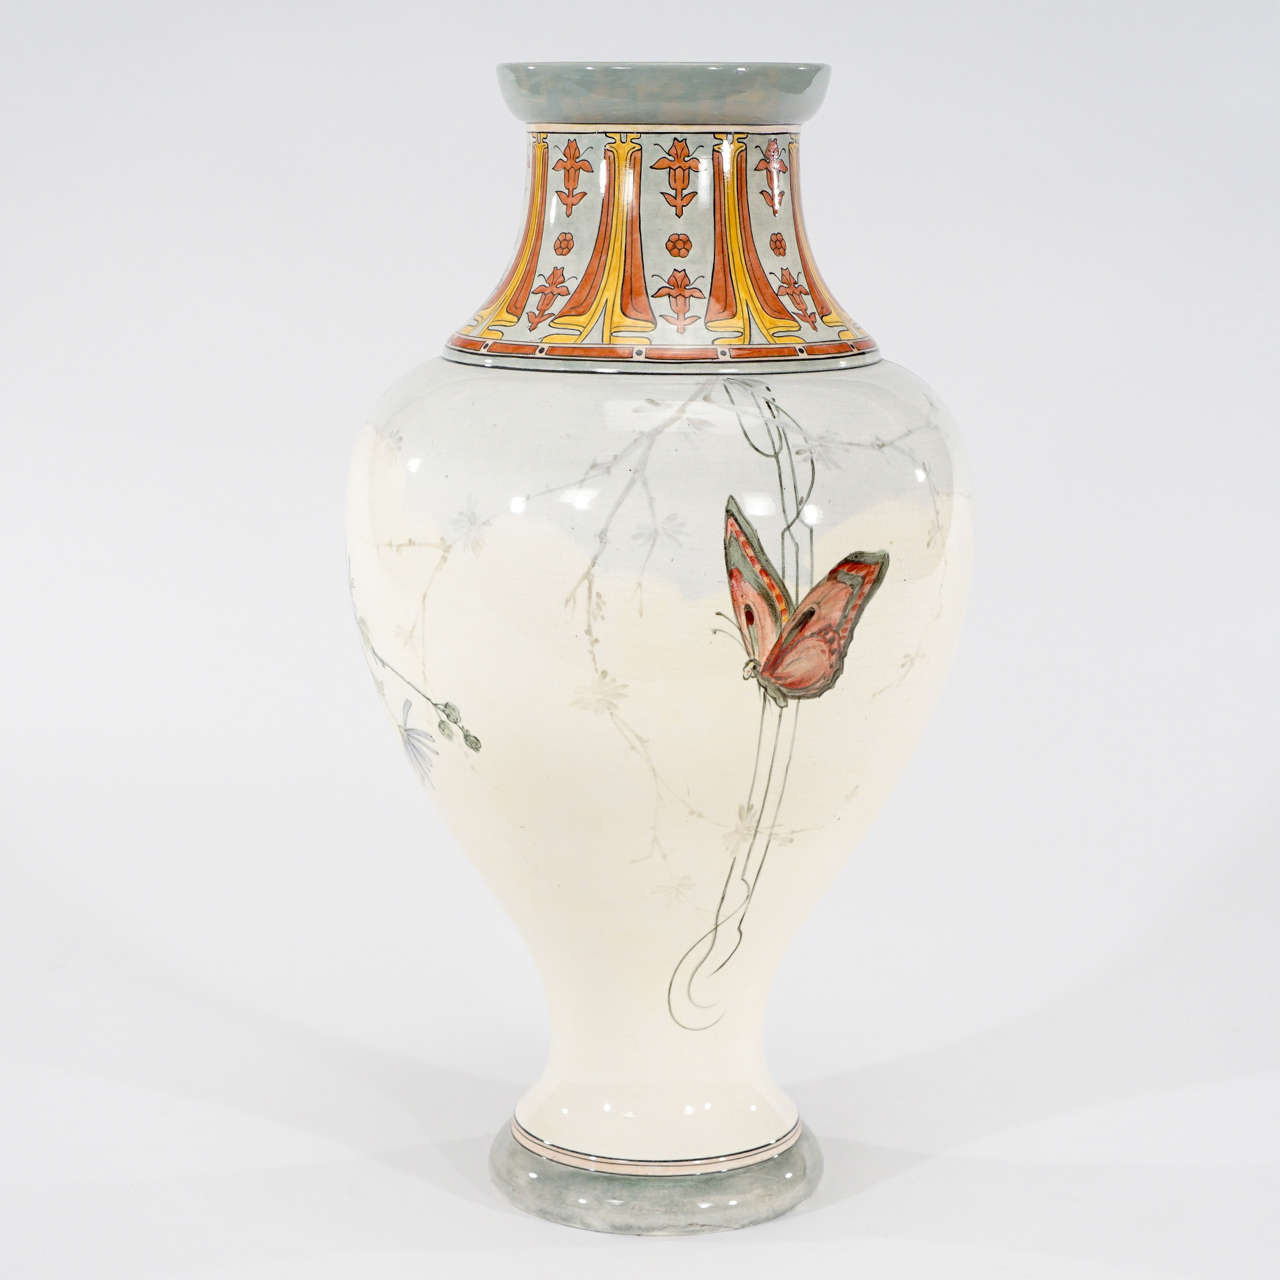 This is an extraordinary French monumental porcelain vase which is the embodiment of Art Nouveau decoration. Hand-painted polychrome enamels depicting a semi-nude female figure in a flowing transparent gown, encircles the vase with the reverse